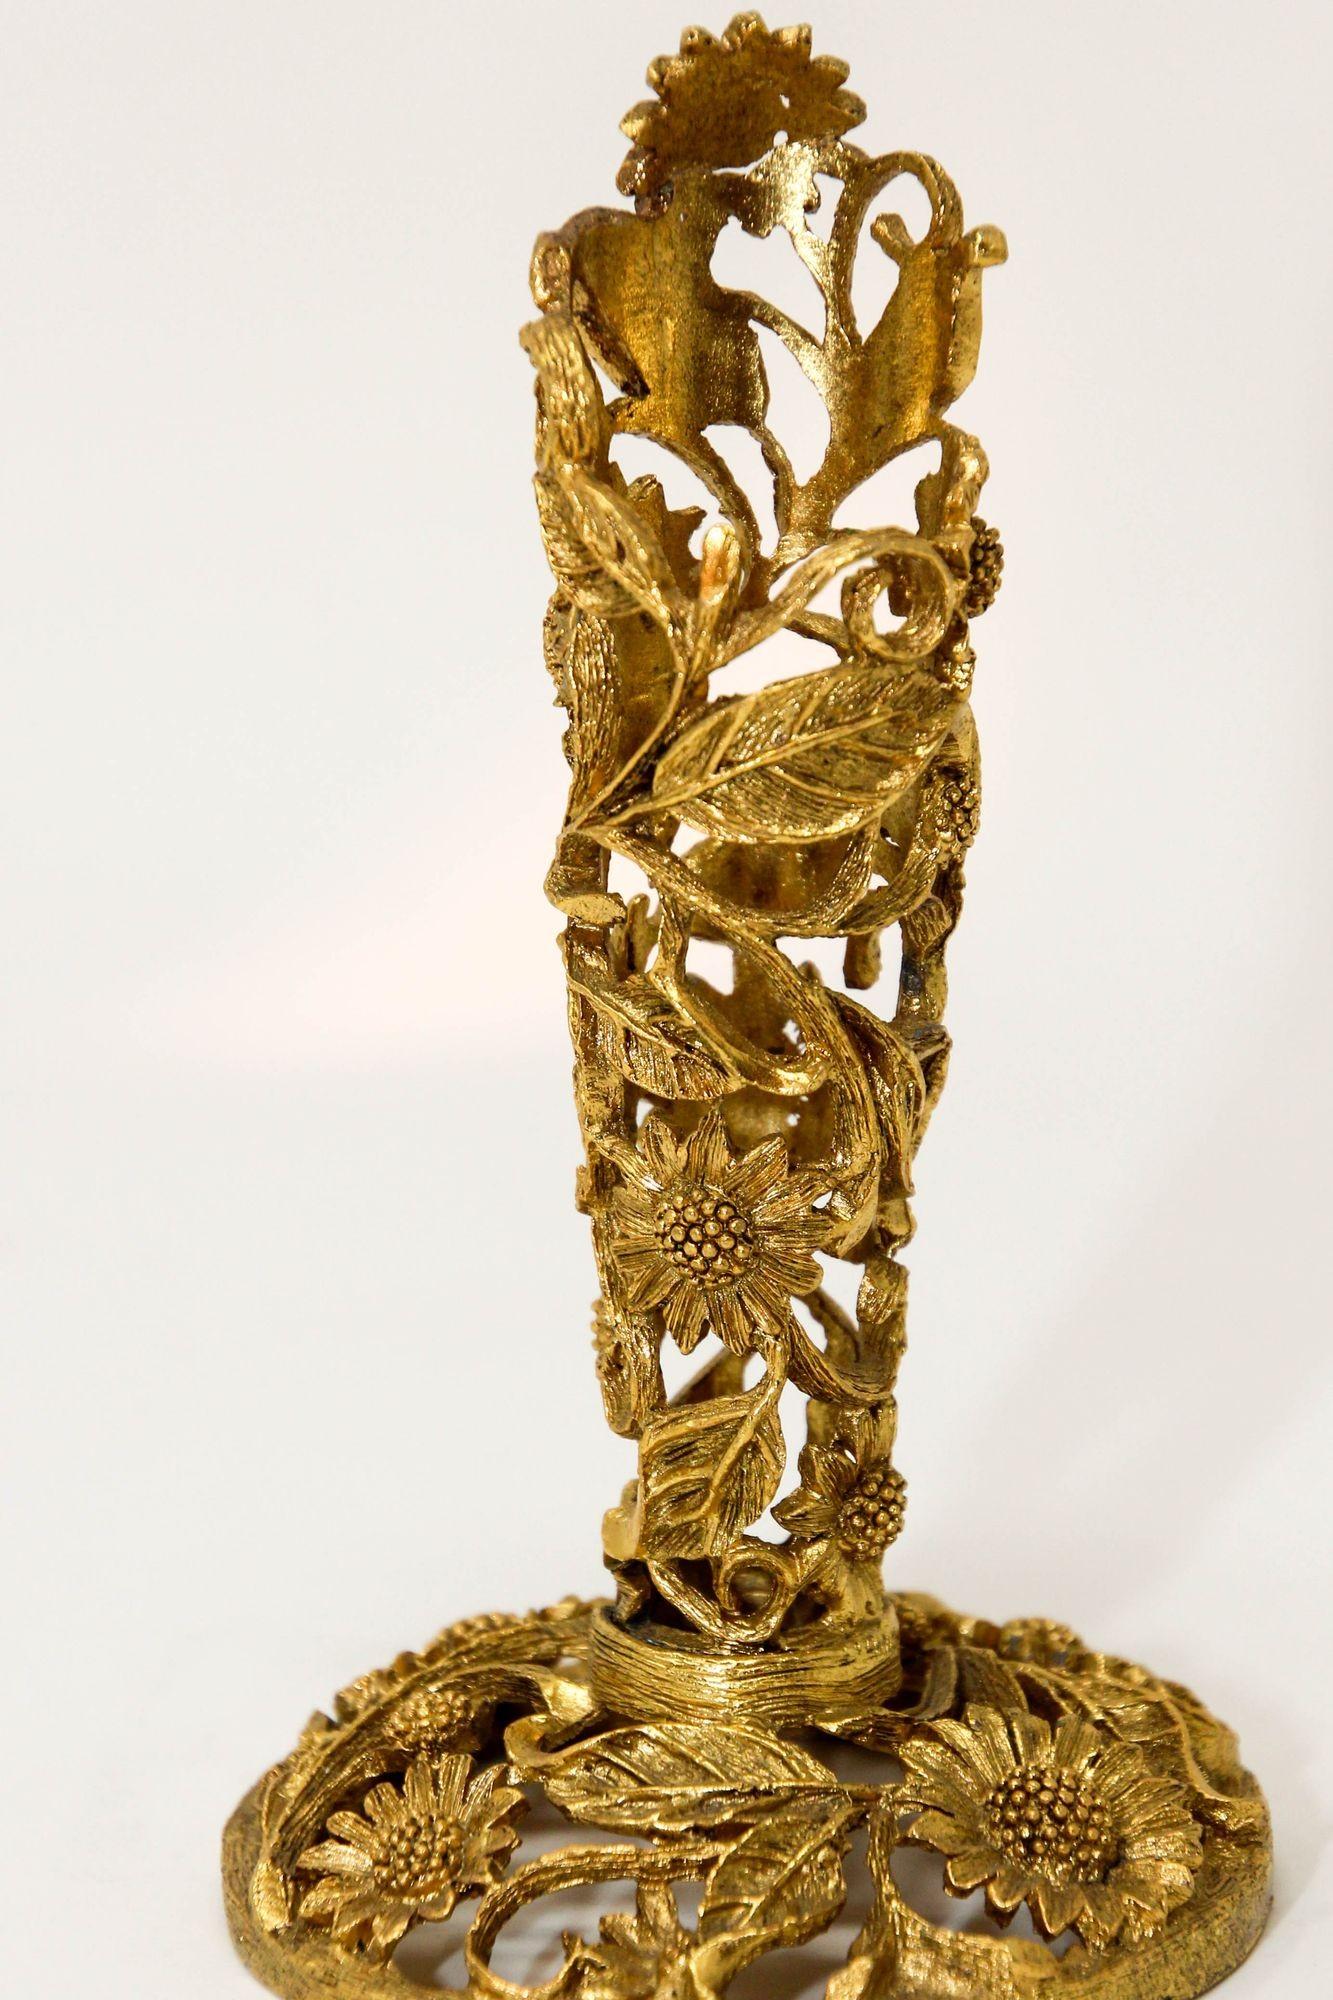 Vintage Matson1960s Ormolu Gold Tone Metal Filigree Bud Glass Vase Holder.
Beautiful gold tone filigree metal ormolu vase holder.
This beautiful vintage Ormolu Matson 24K gold plated floral filigree stand is from the late 1940's.
Victorian